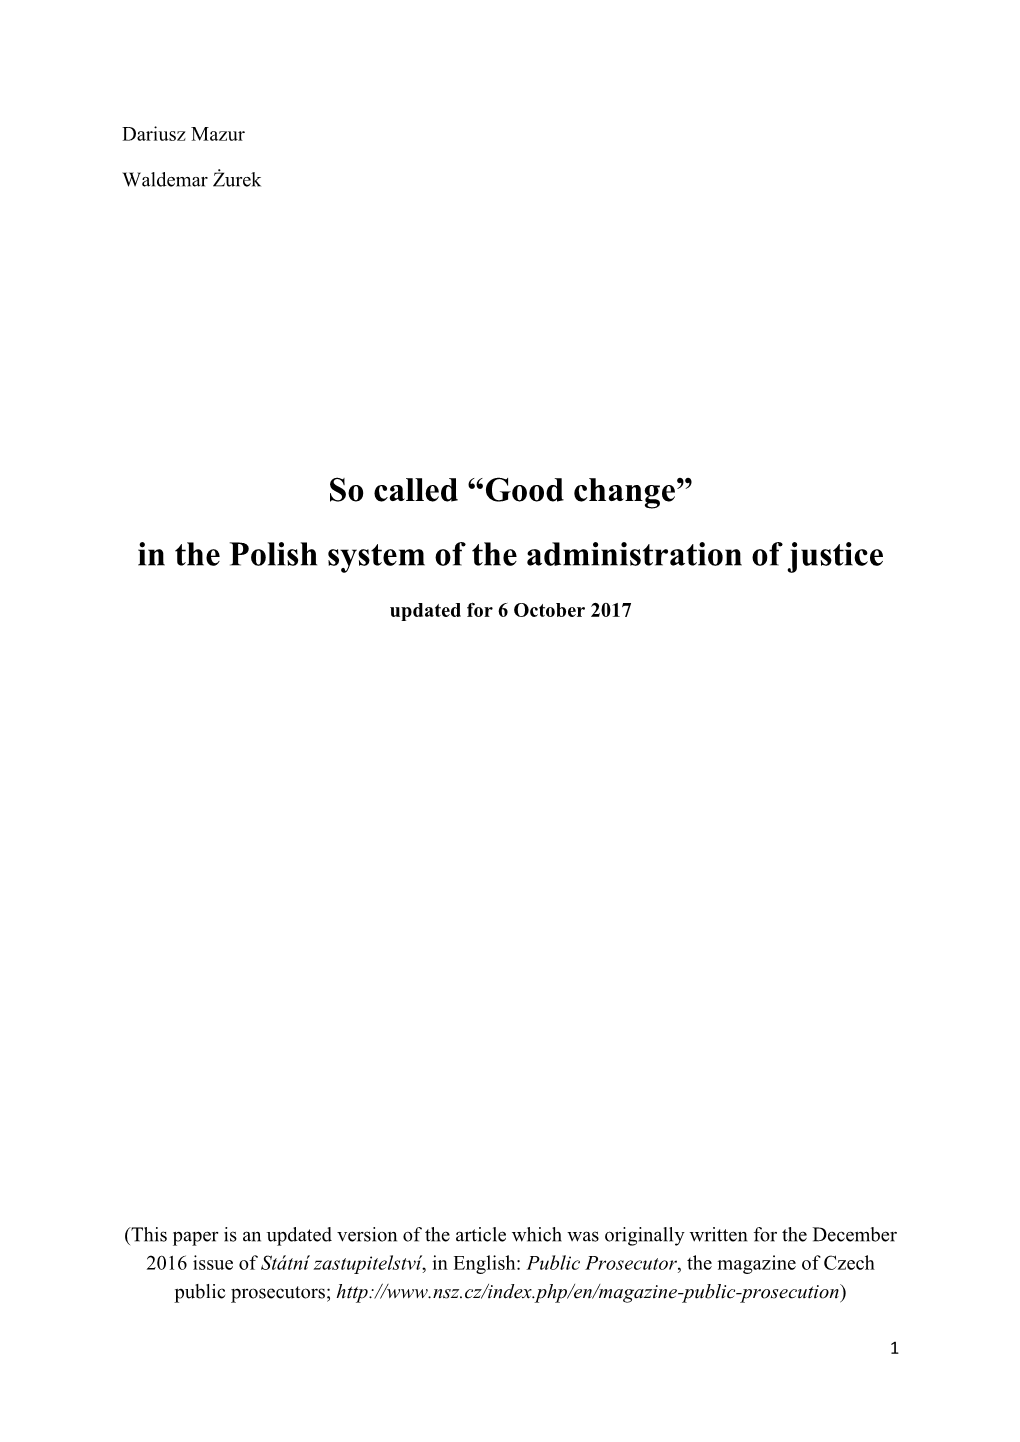 So Called “Good Change” in the Polish System of the Administration of Justice